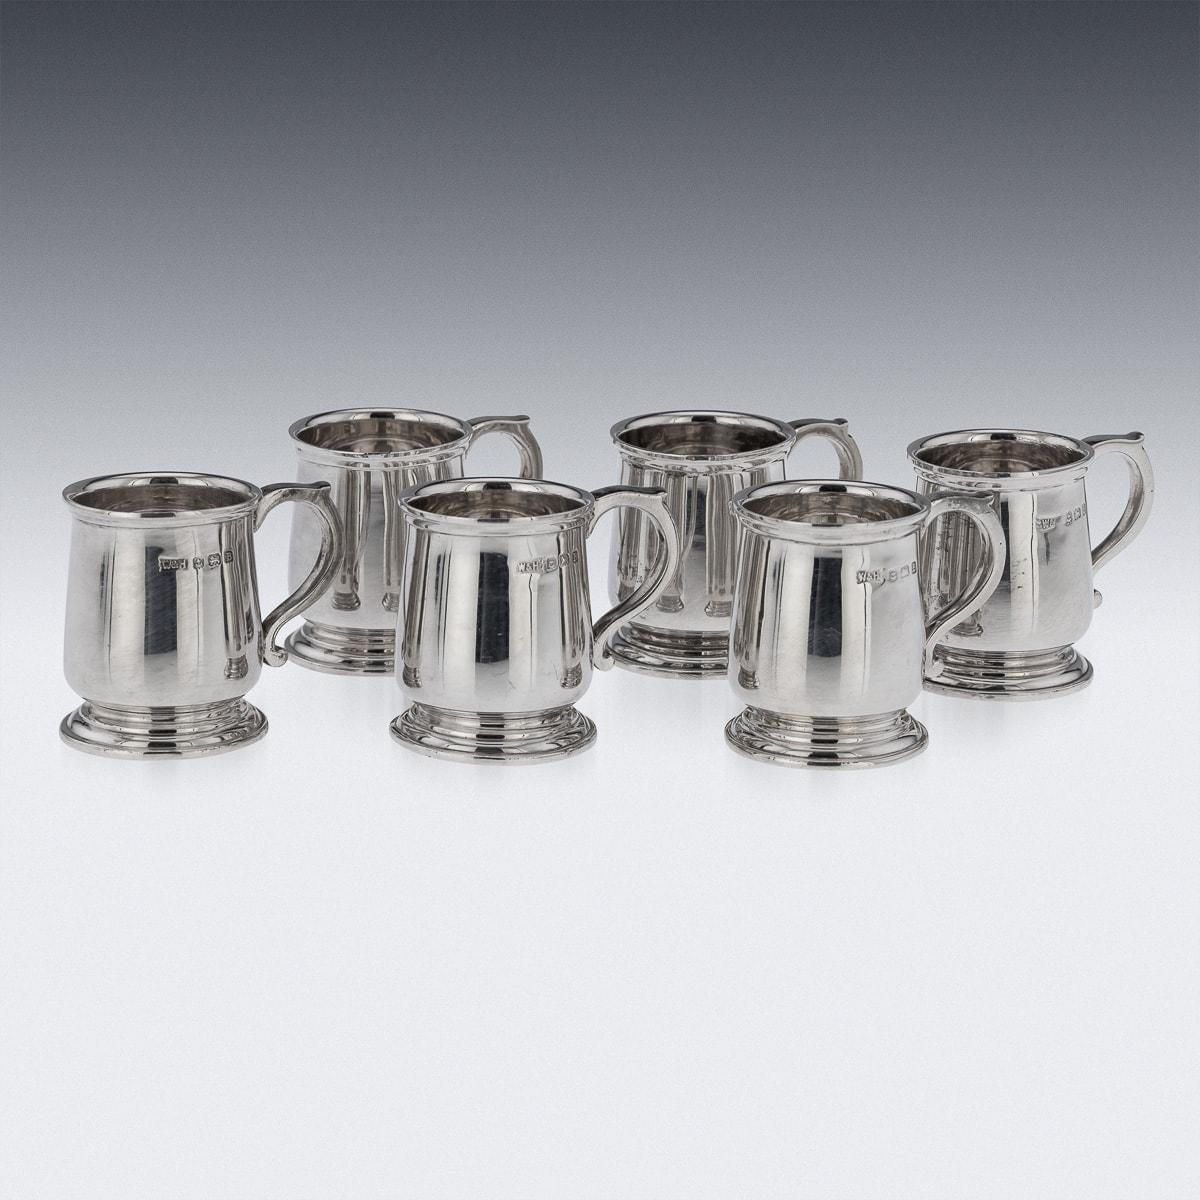 Antique early 20th Century set of six solid silver novelty miniature tankards, used as shots, The set of six tankards come in the original box by Walker & Hall Ltd of Sheffield. Hallmarked English silver (925 standard), Sheffield, year 1926 (B),